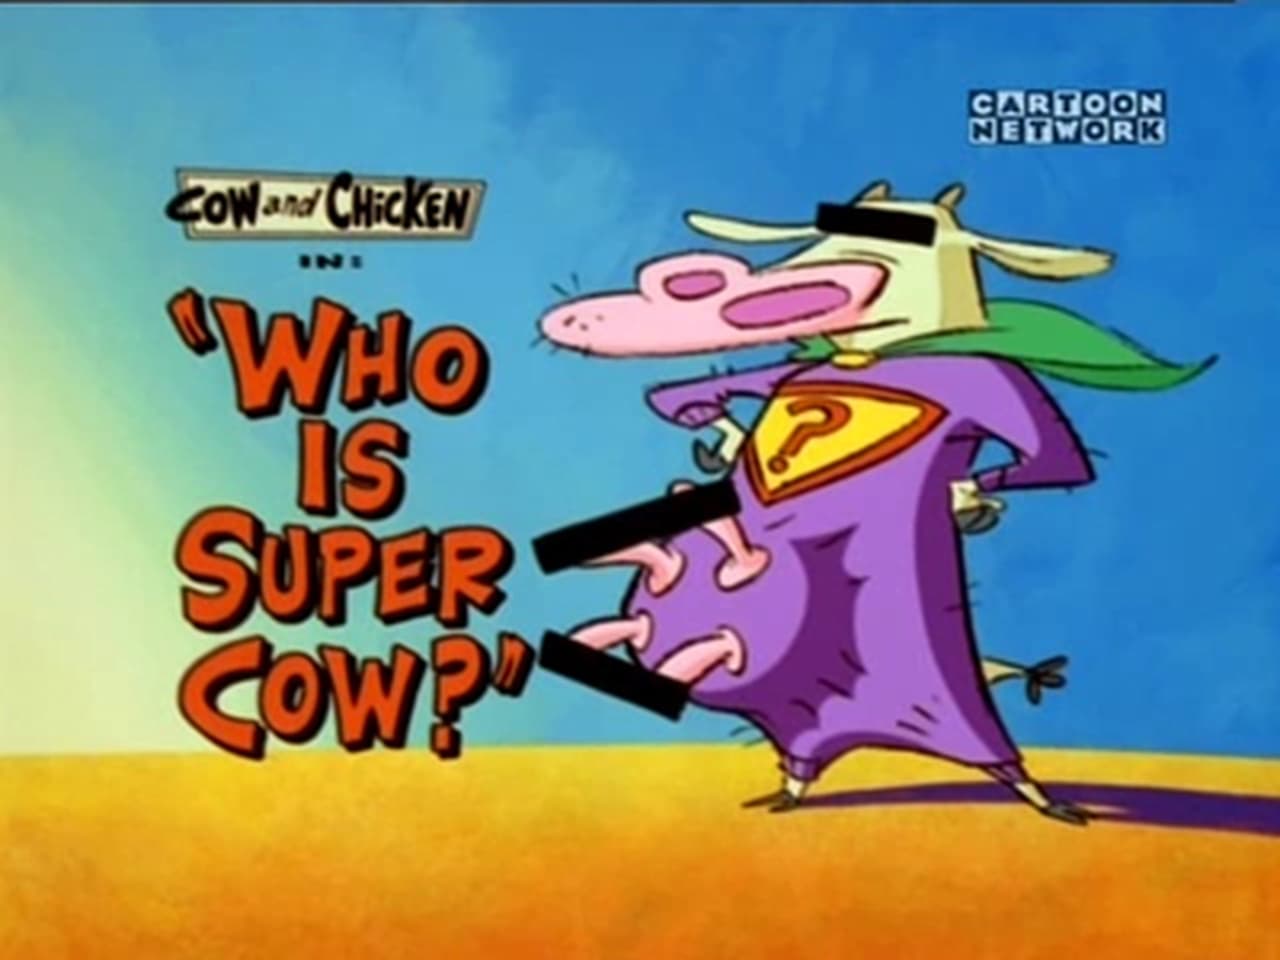 Cow and Chicken - Season 1 Episode 6 : Who is Super Cow?